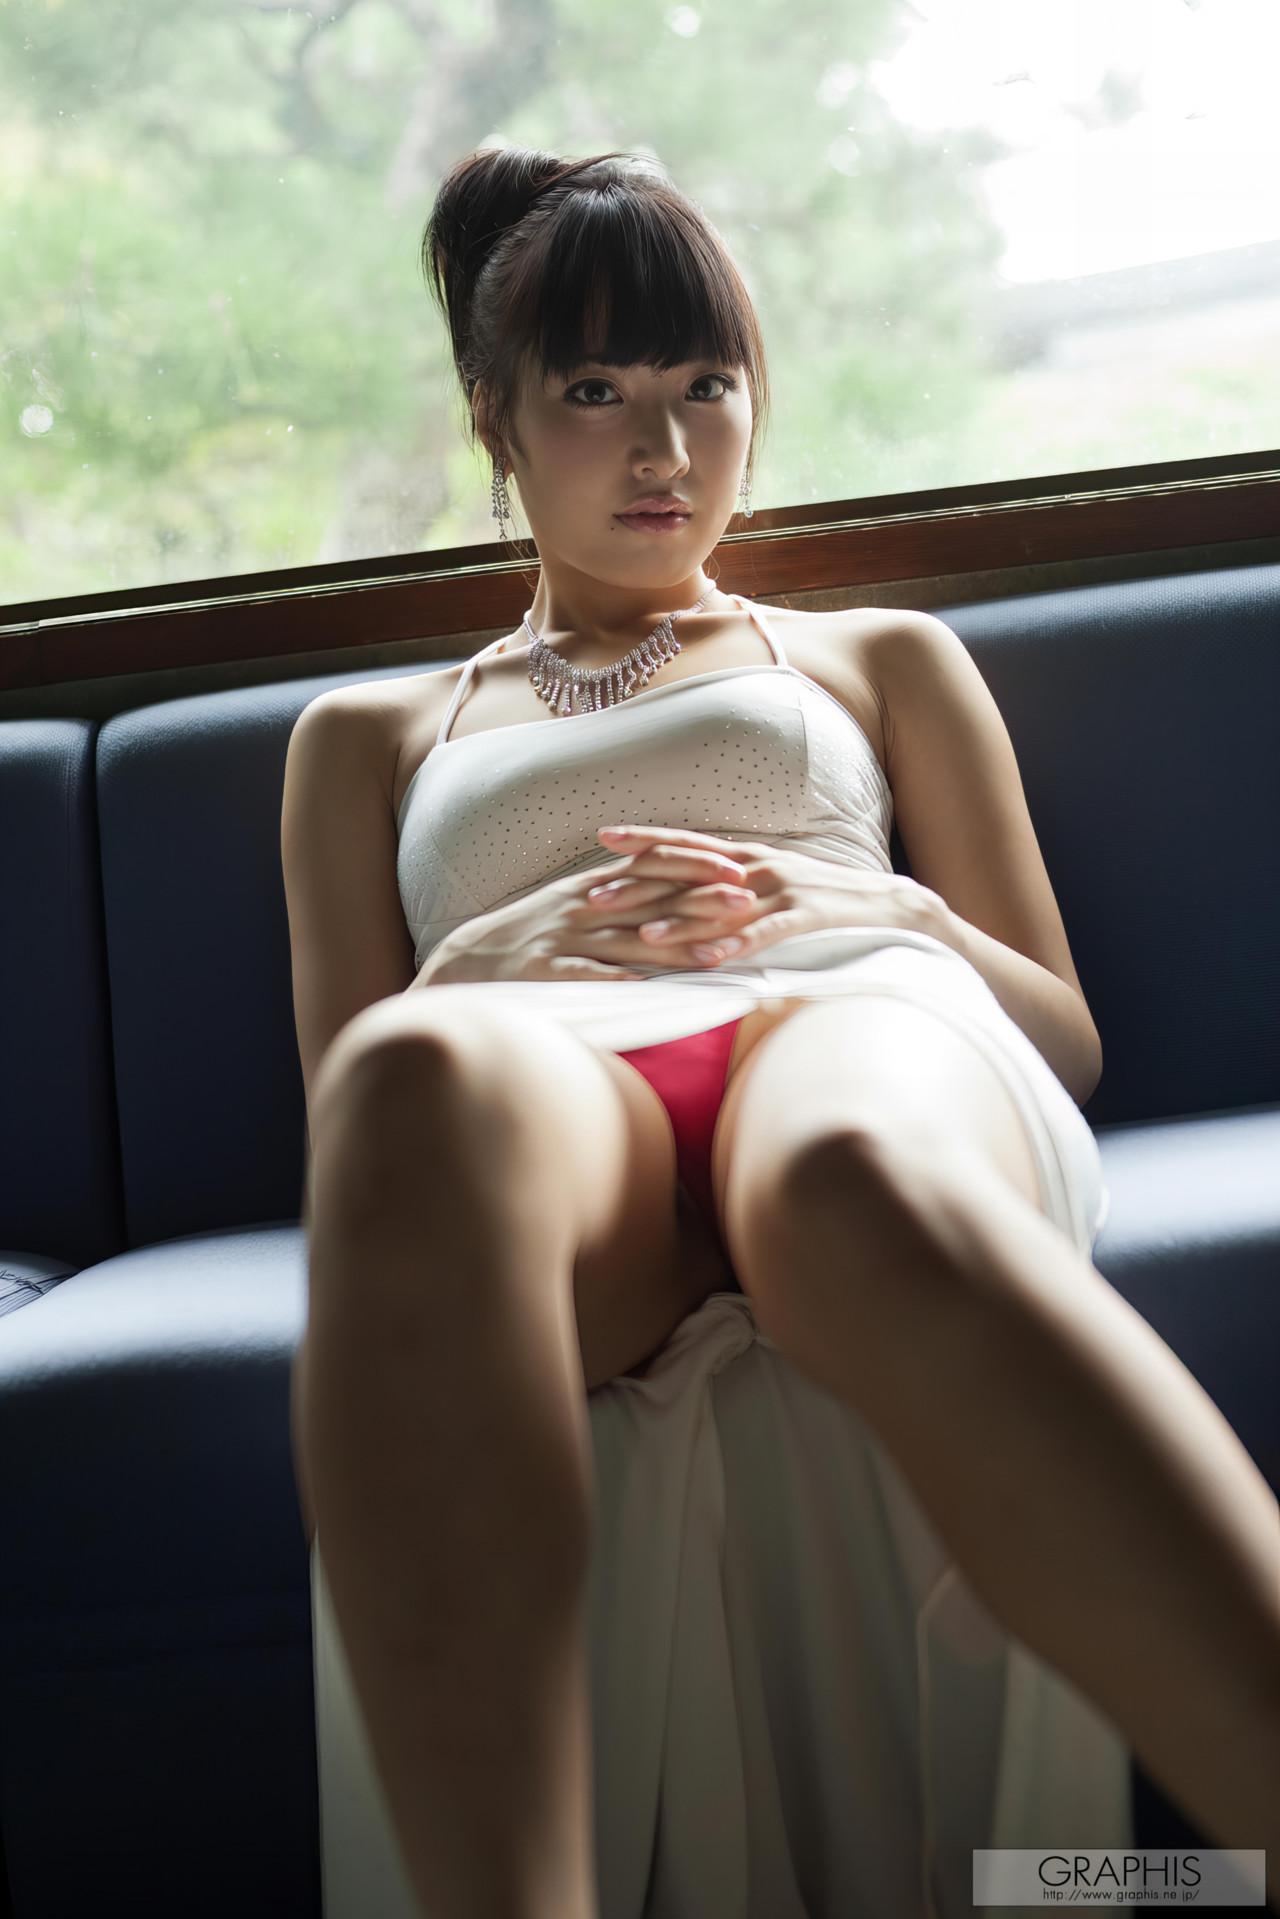 Kana Yume 由愛可奈, Graphis Special Contents [A to Z] Vol.03(31)